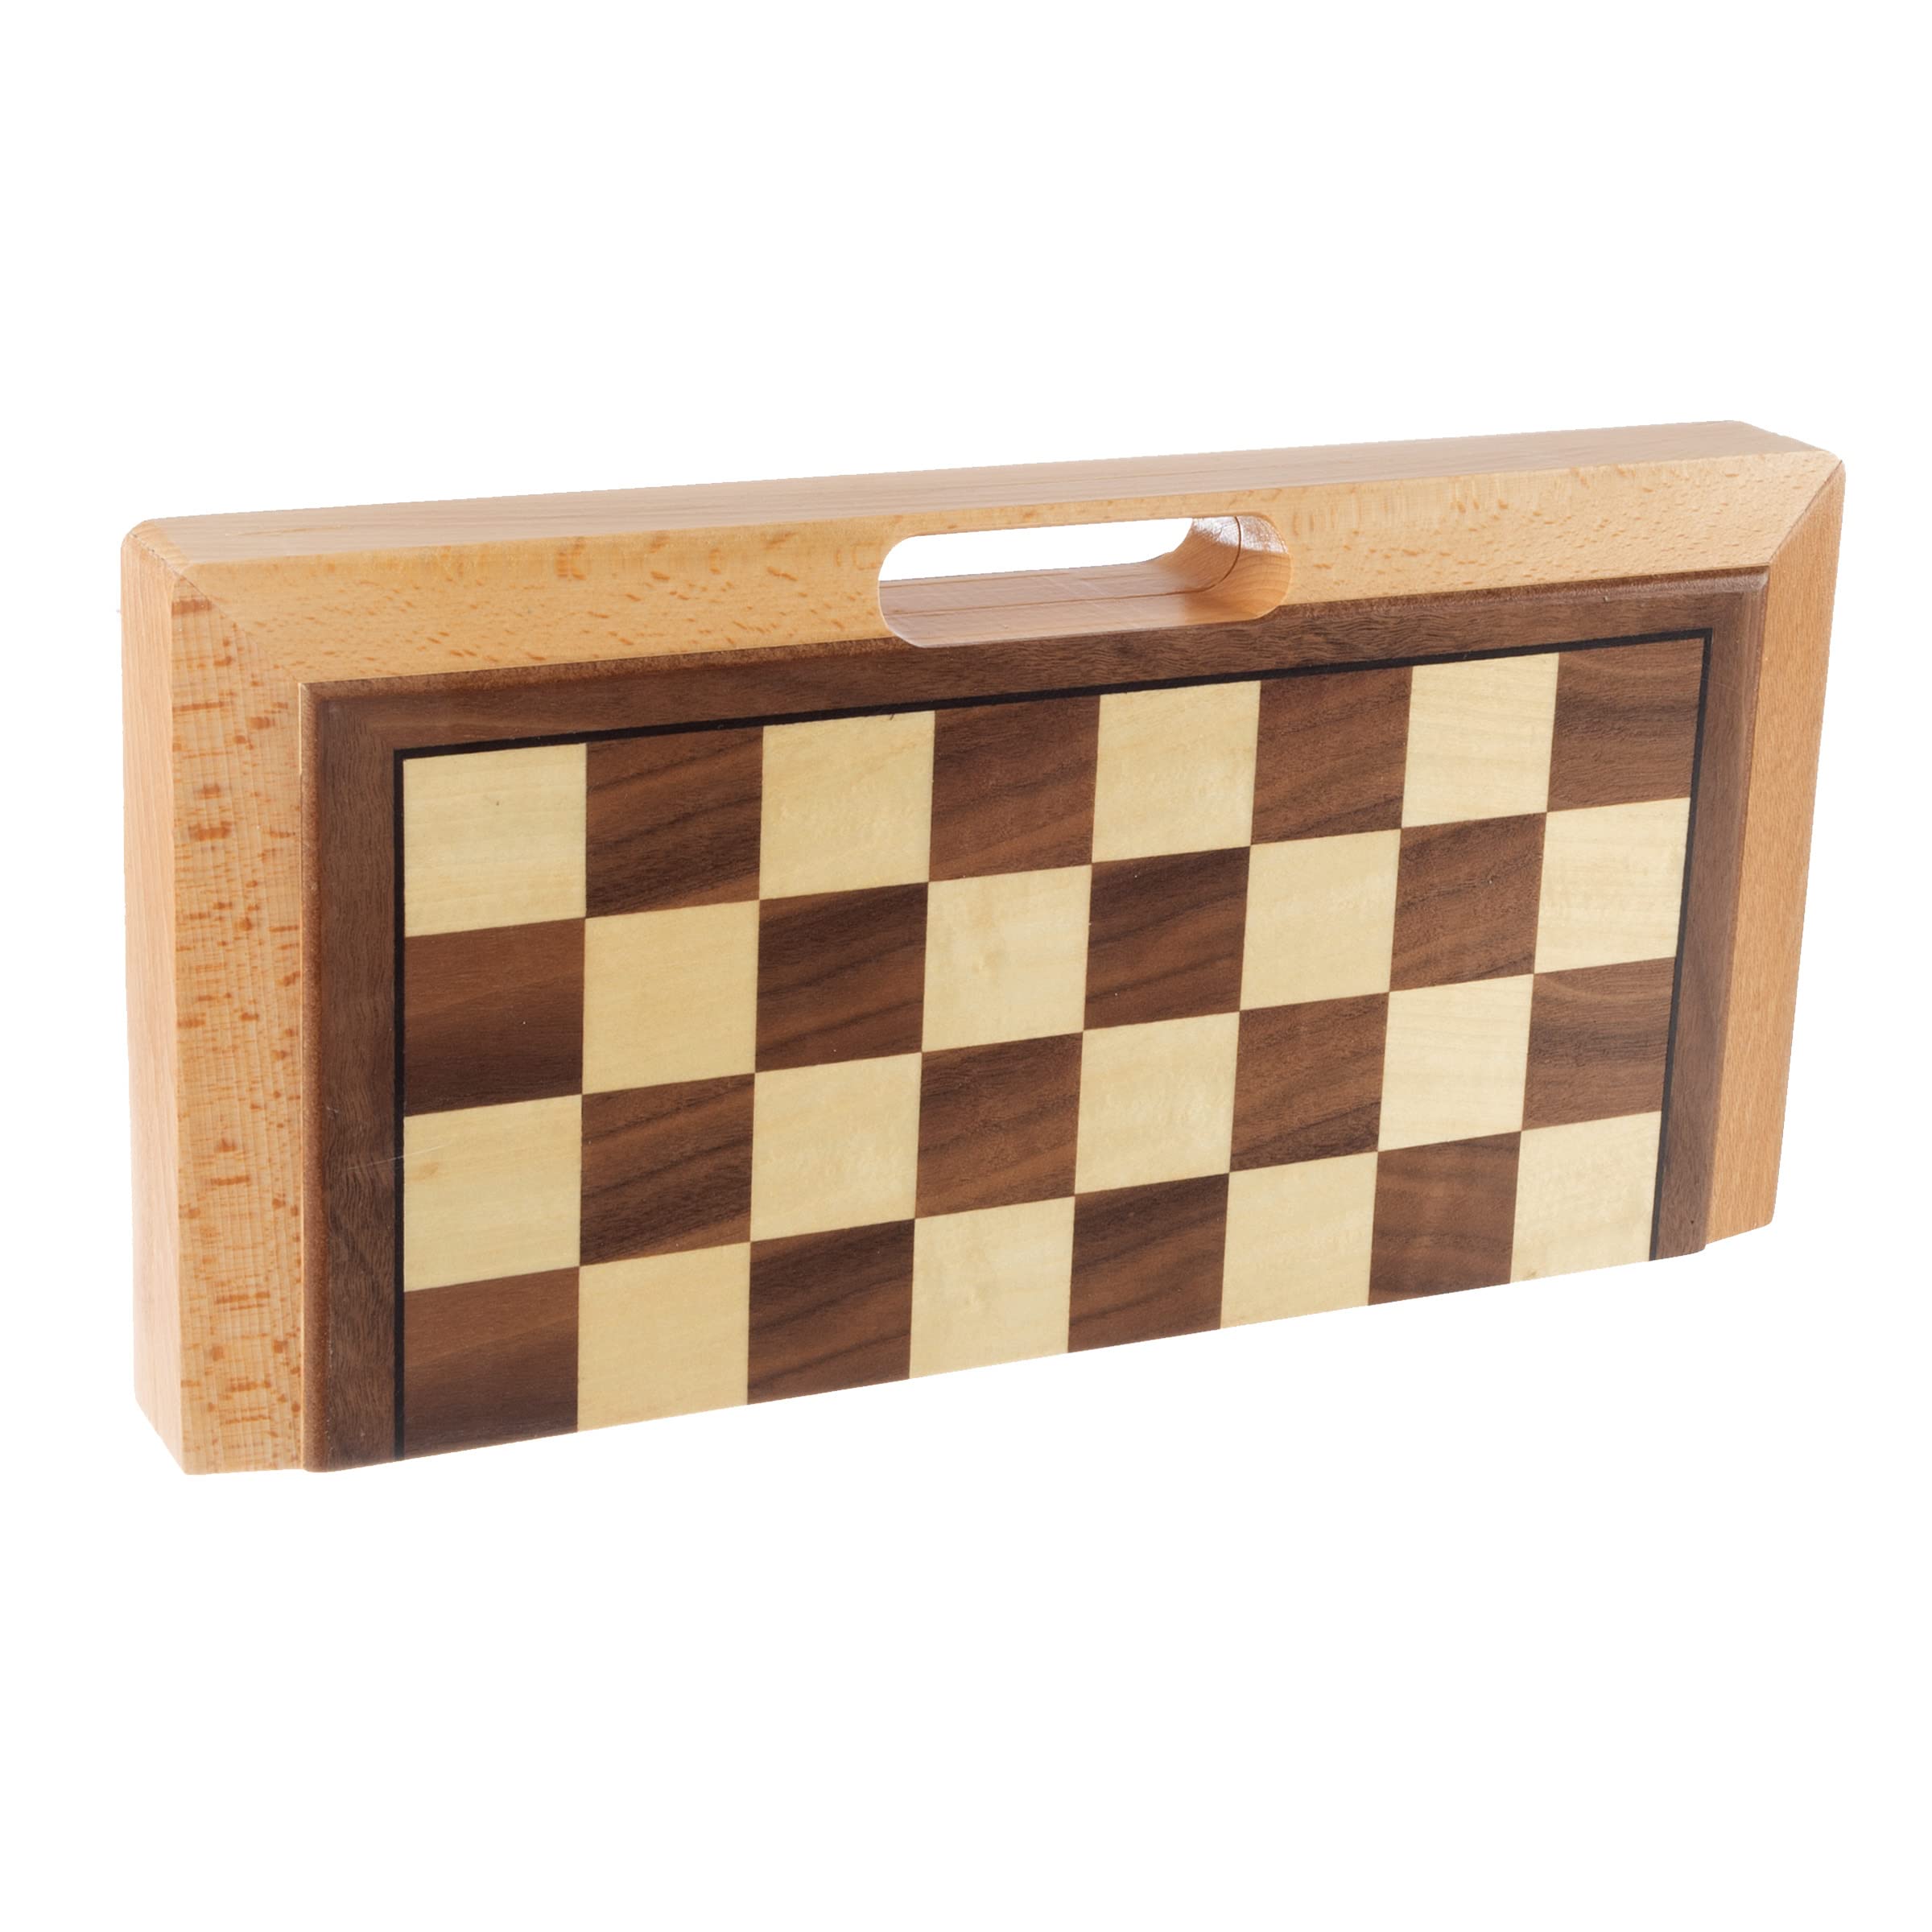 Trademark Games Hey! Play! Deluxe Wooden Chess, Checker and Backgammon Set, Brown